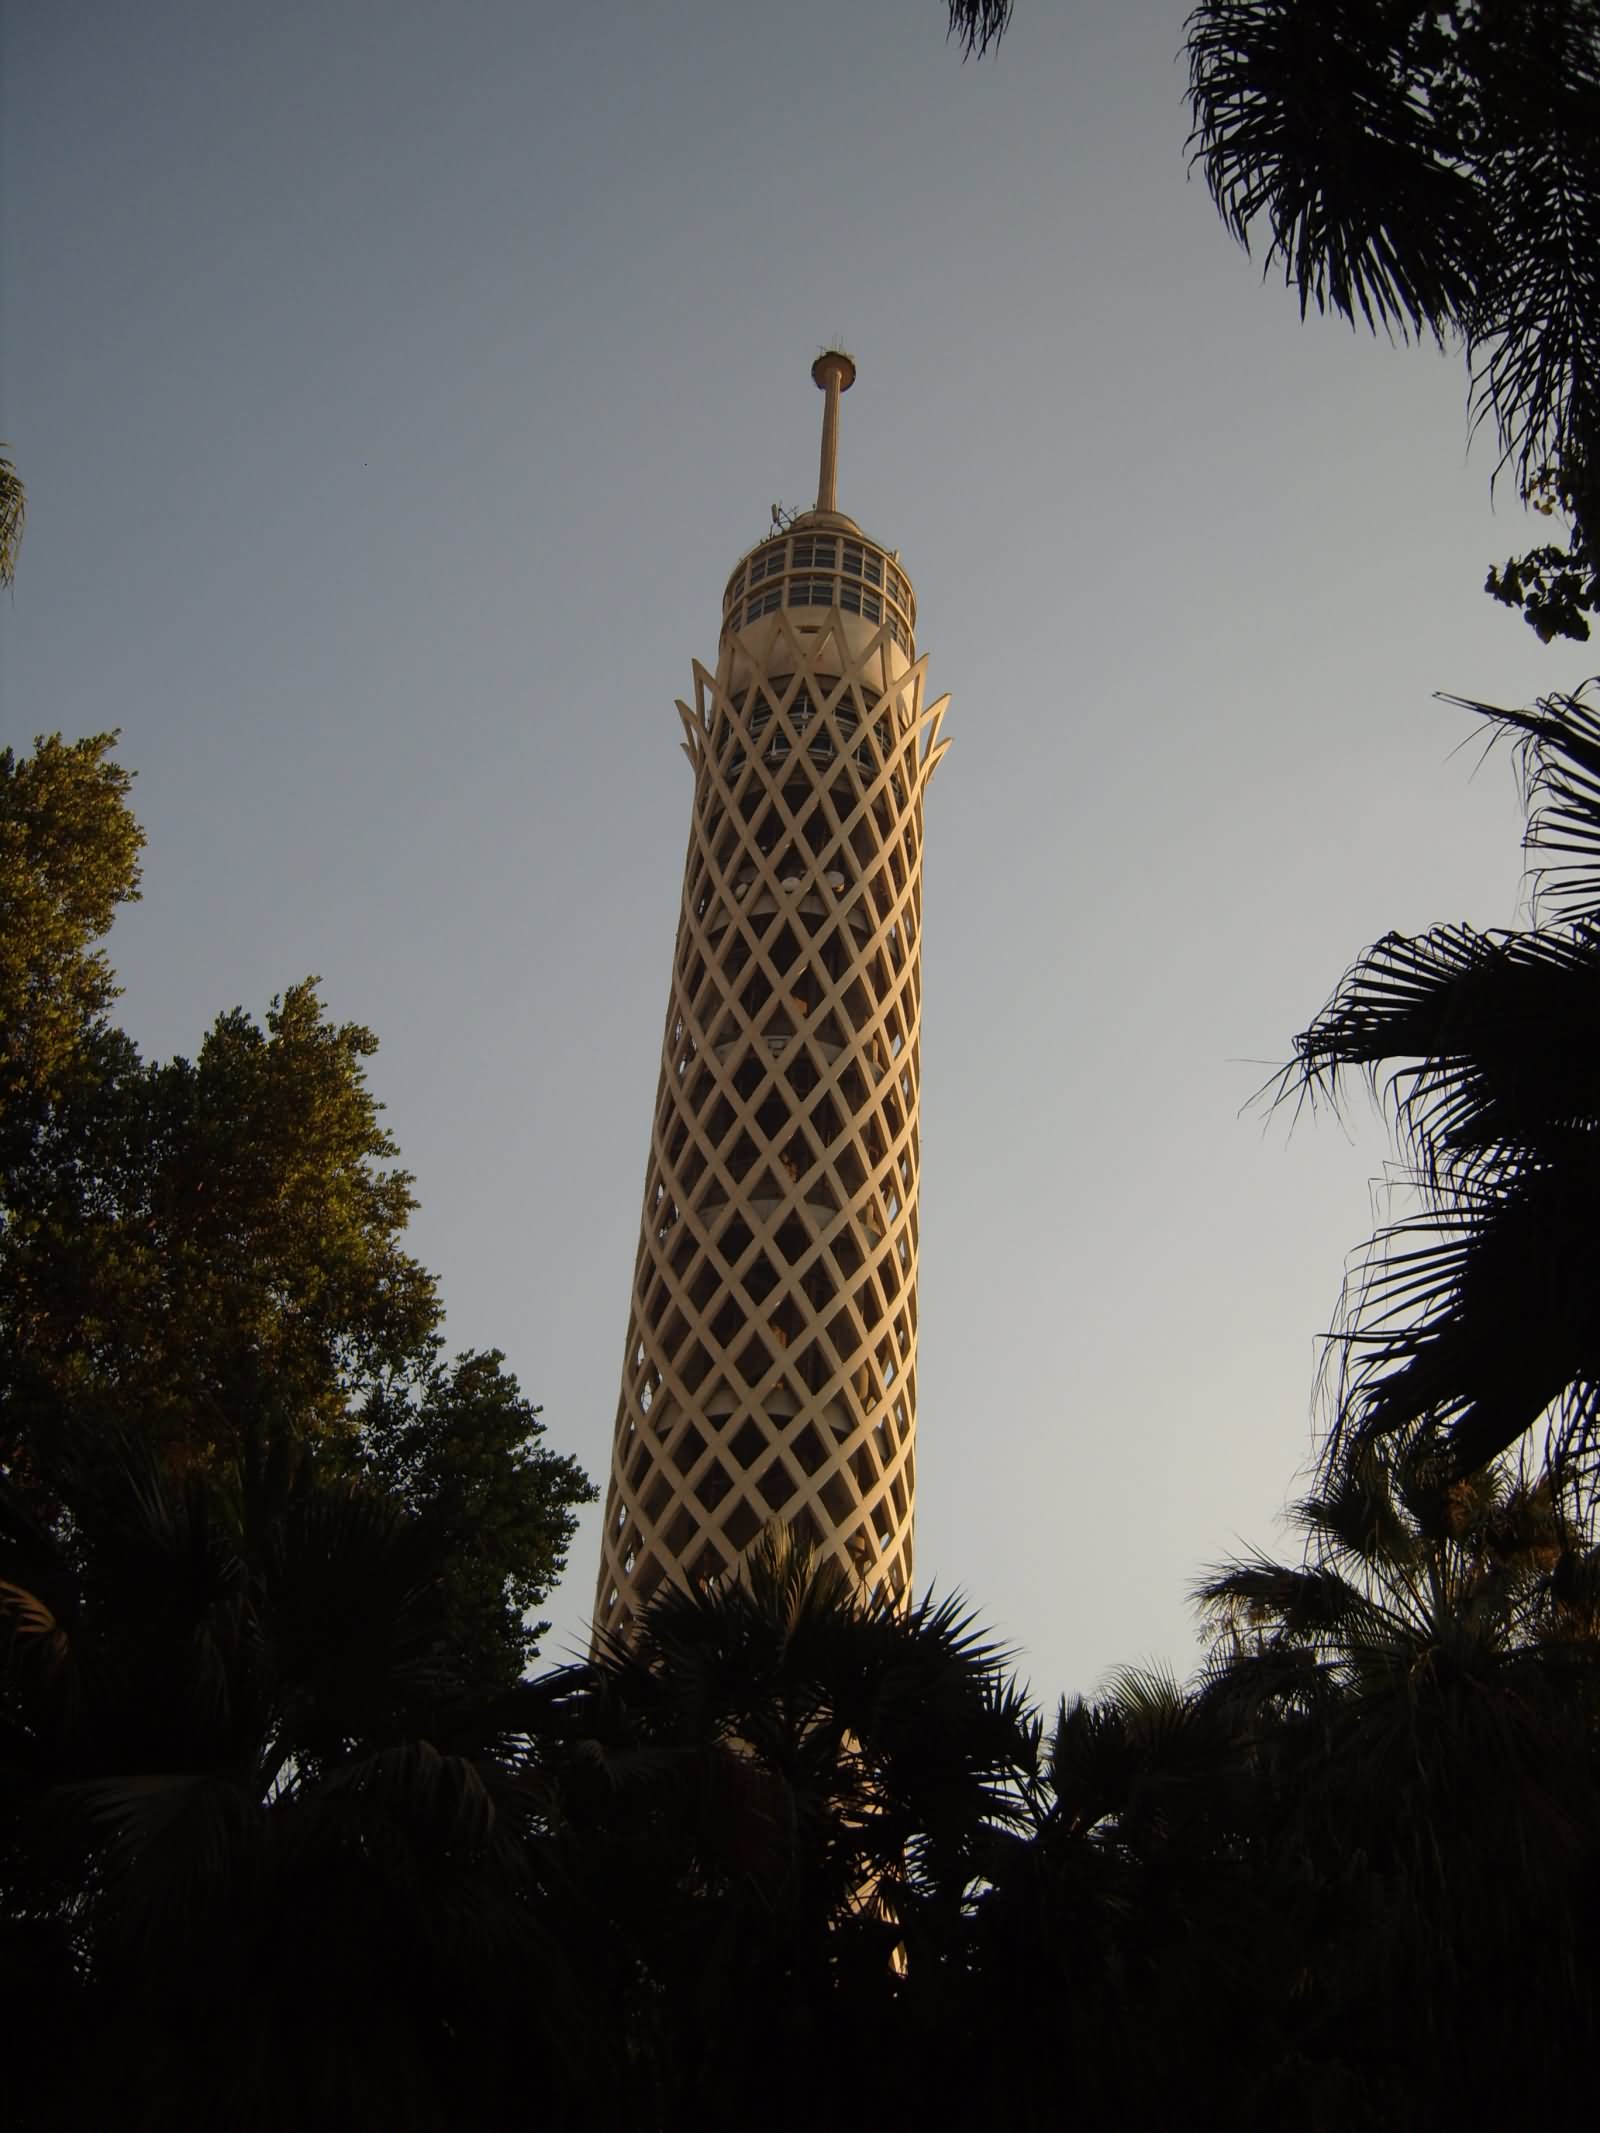 The Cairo Tower Picture